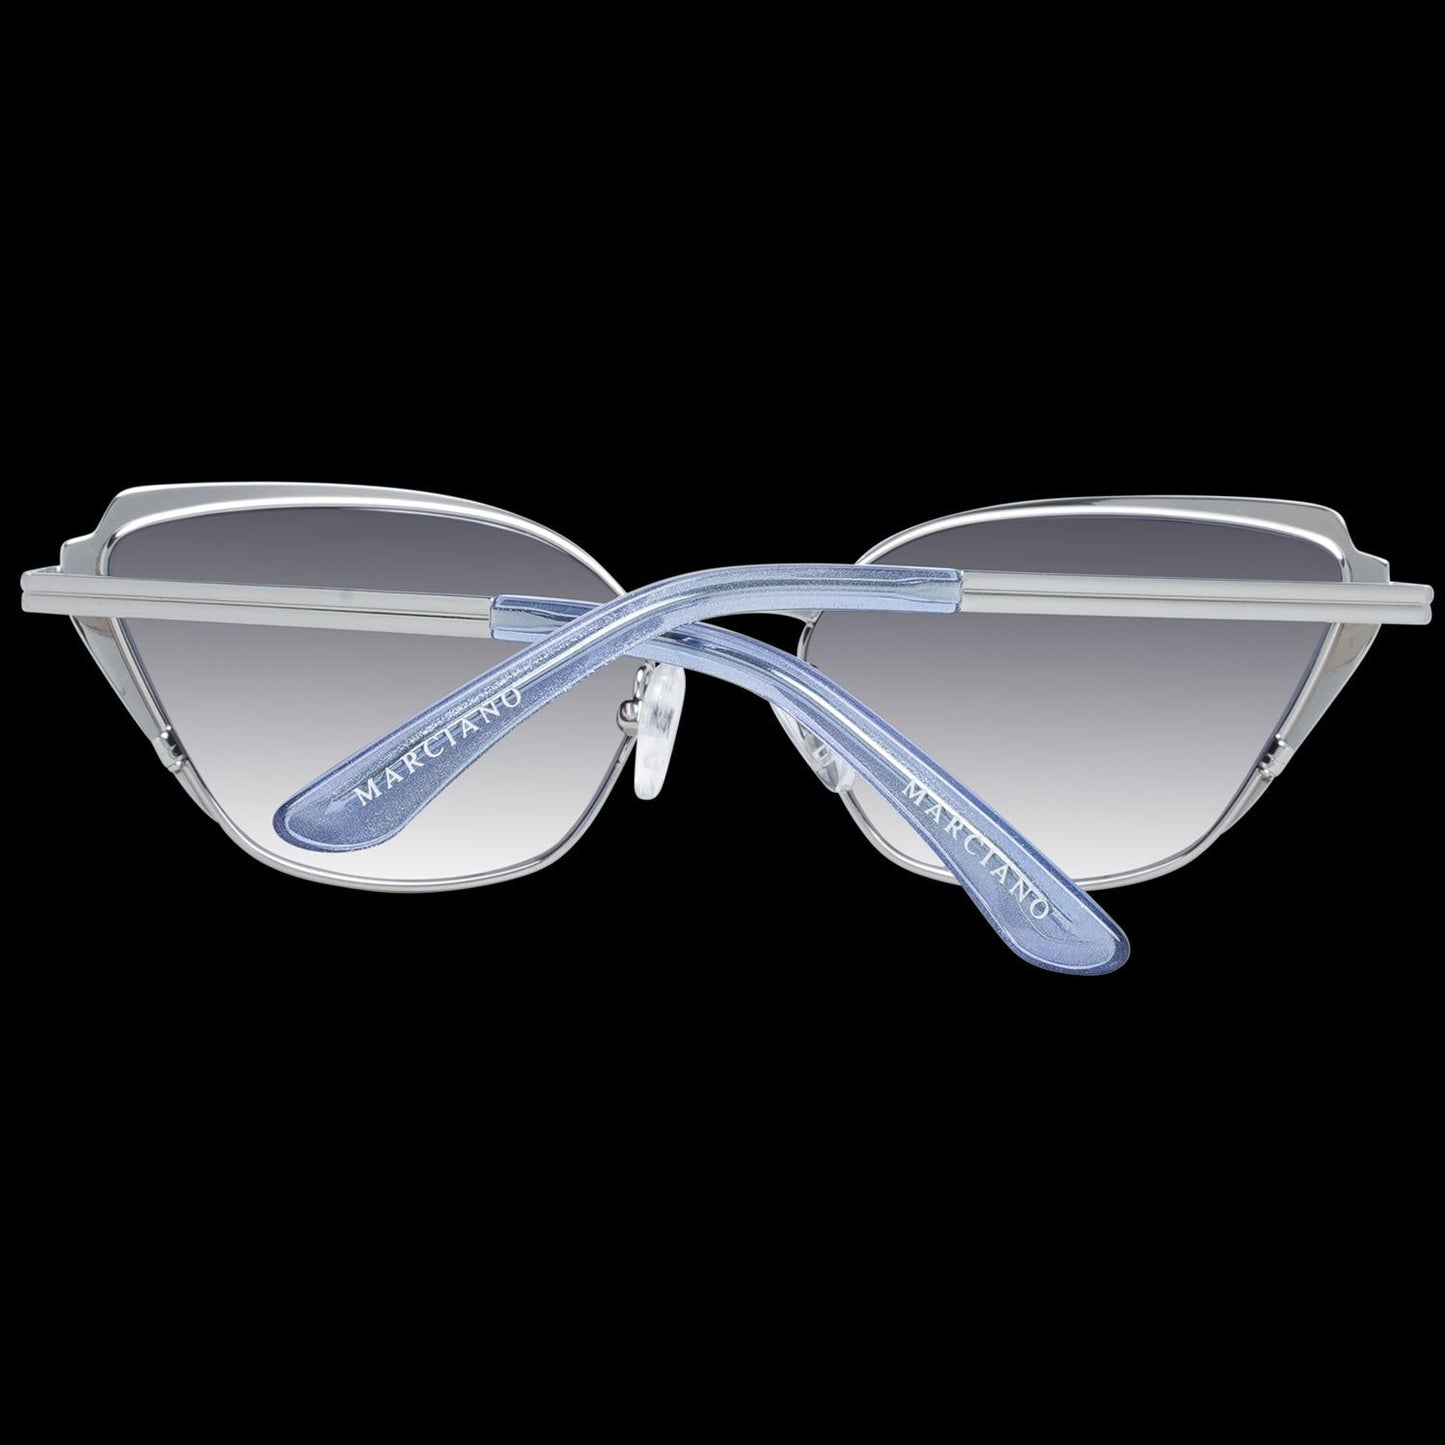 MARCIANO By GUESS SUNGLASSES MARCIANO BY GUESS MOD. GM0818 5610W SUNGLASSES & EYEWEAR marciano-by-guess-mod-gm0818-5610w